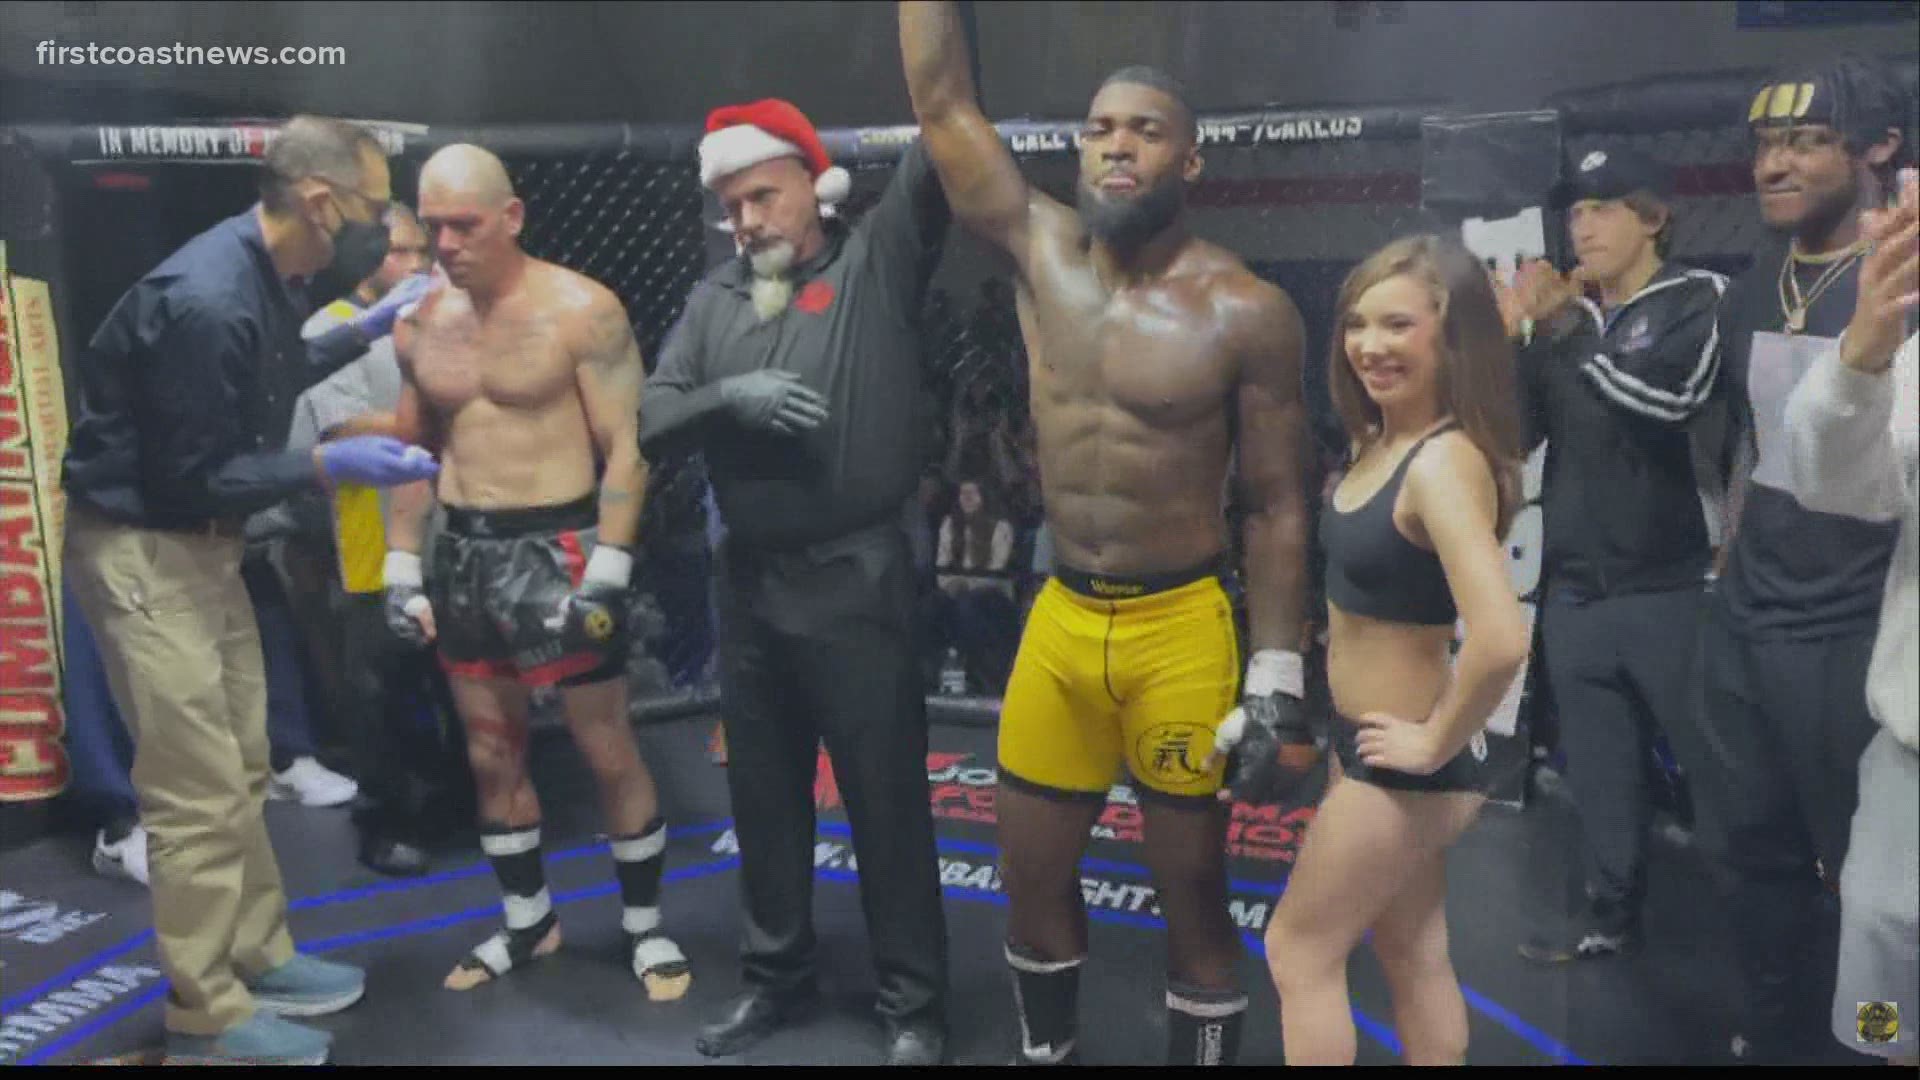 MMA fighter Reggie Northrup gearing up for third fight firstcoastnews